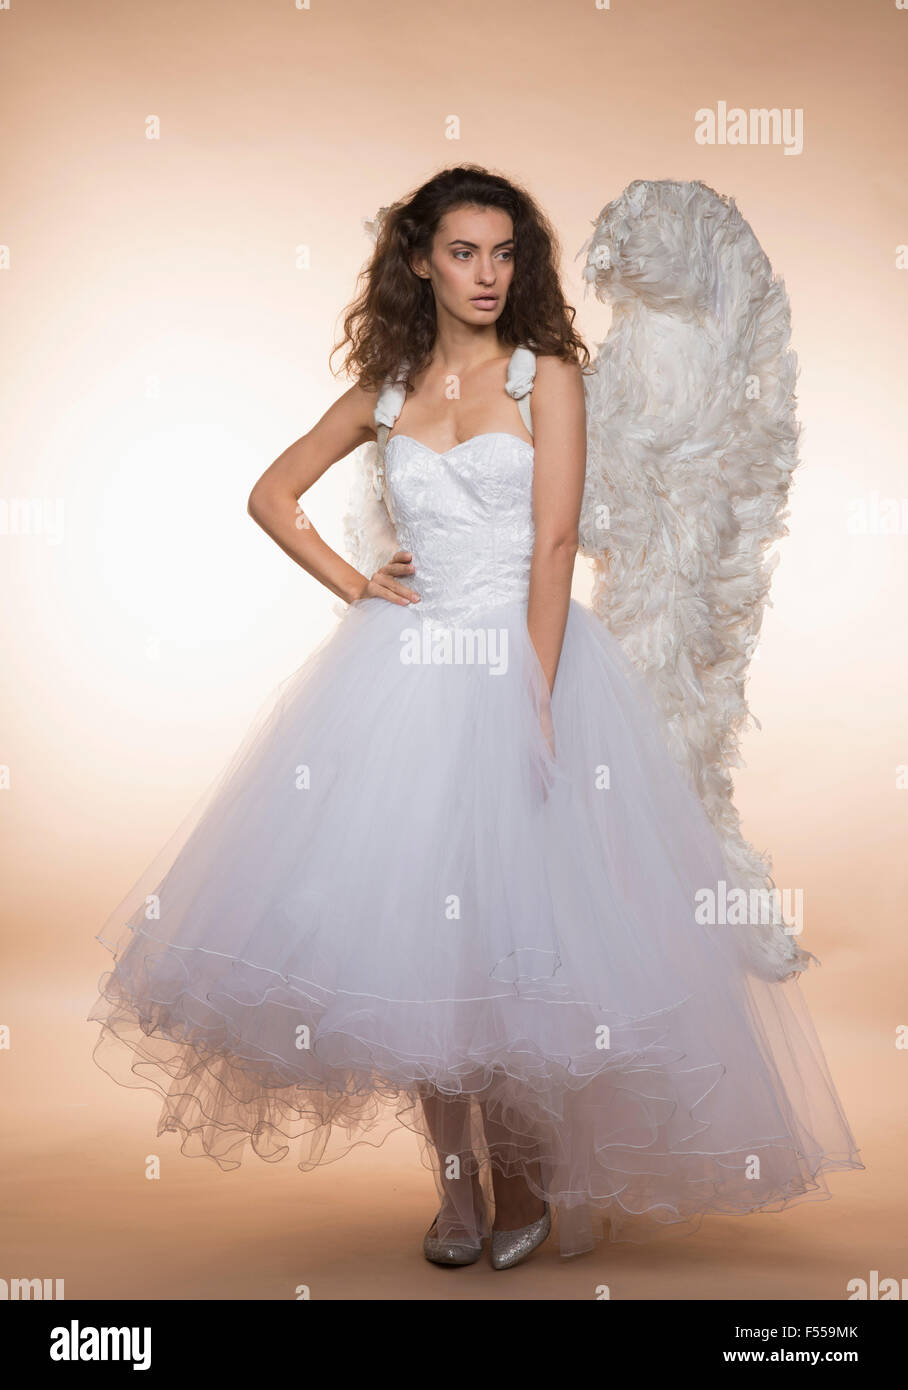 Confident bride in angel wings standing against colored background Stock Photo